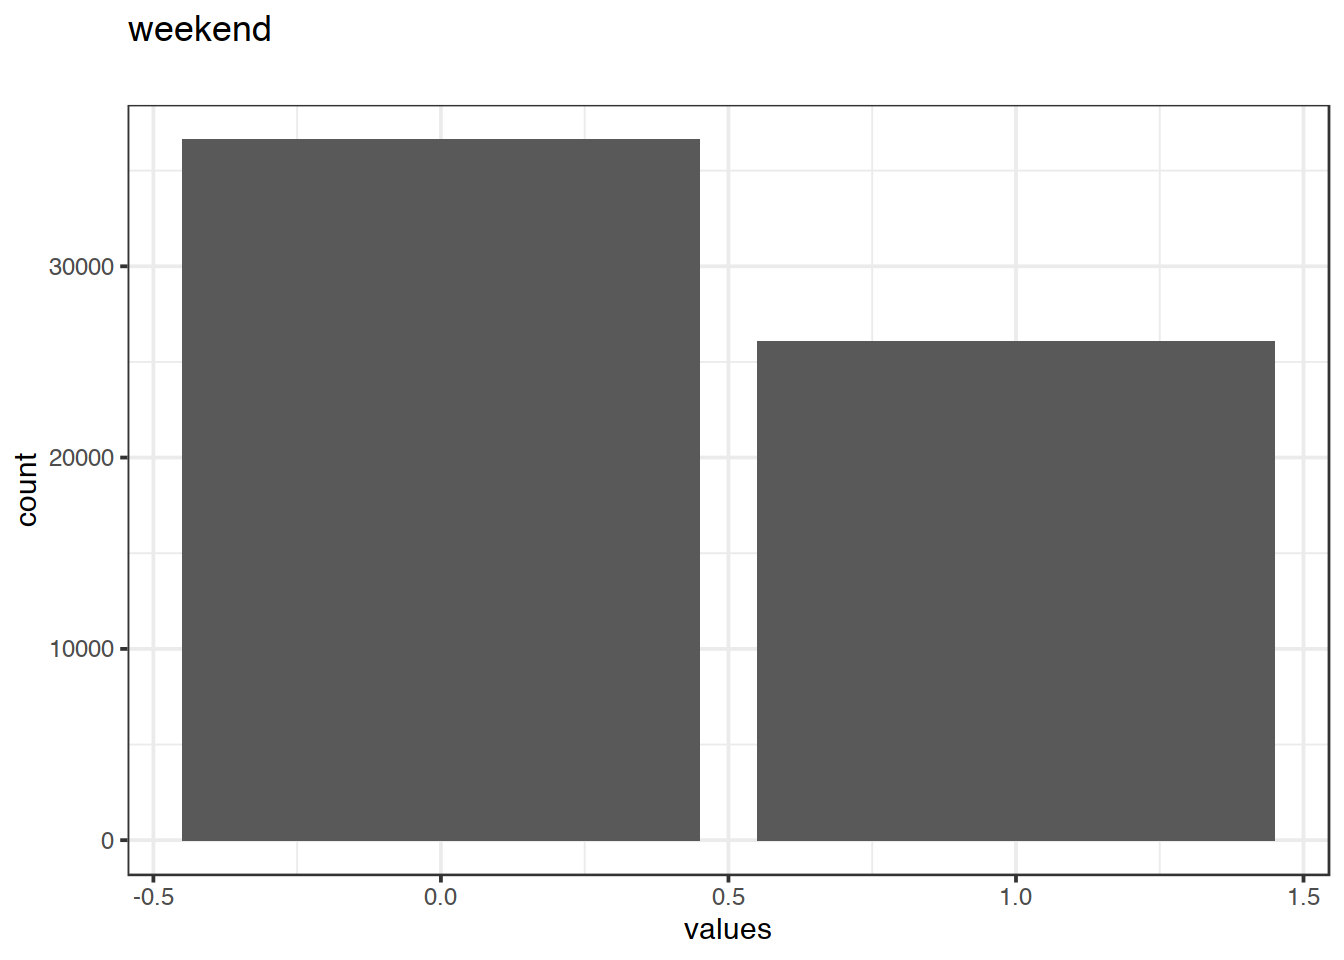 Distribution of values for weekend